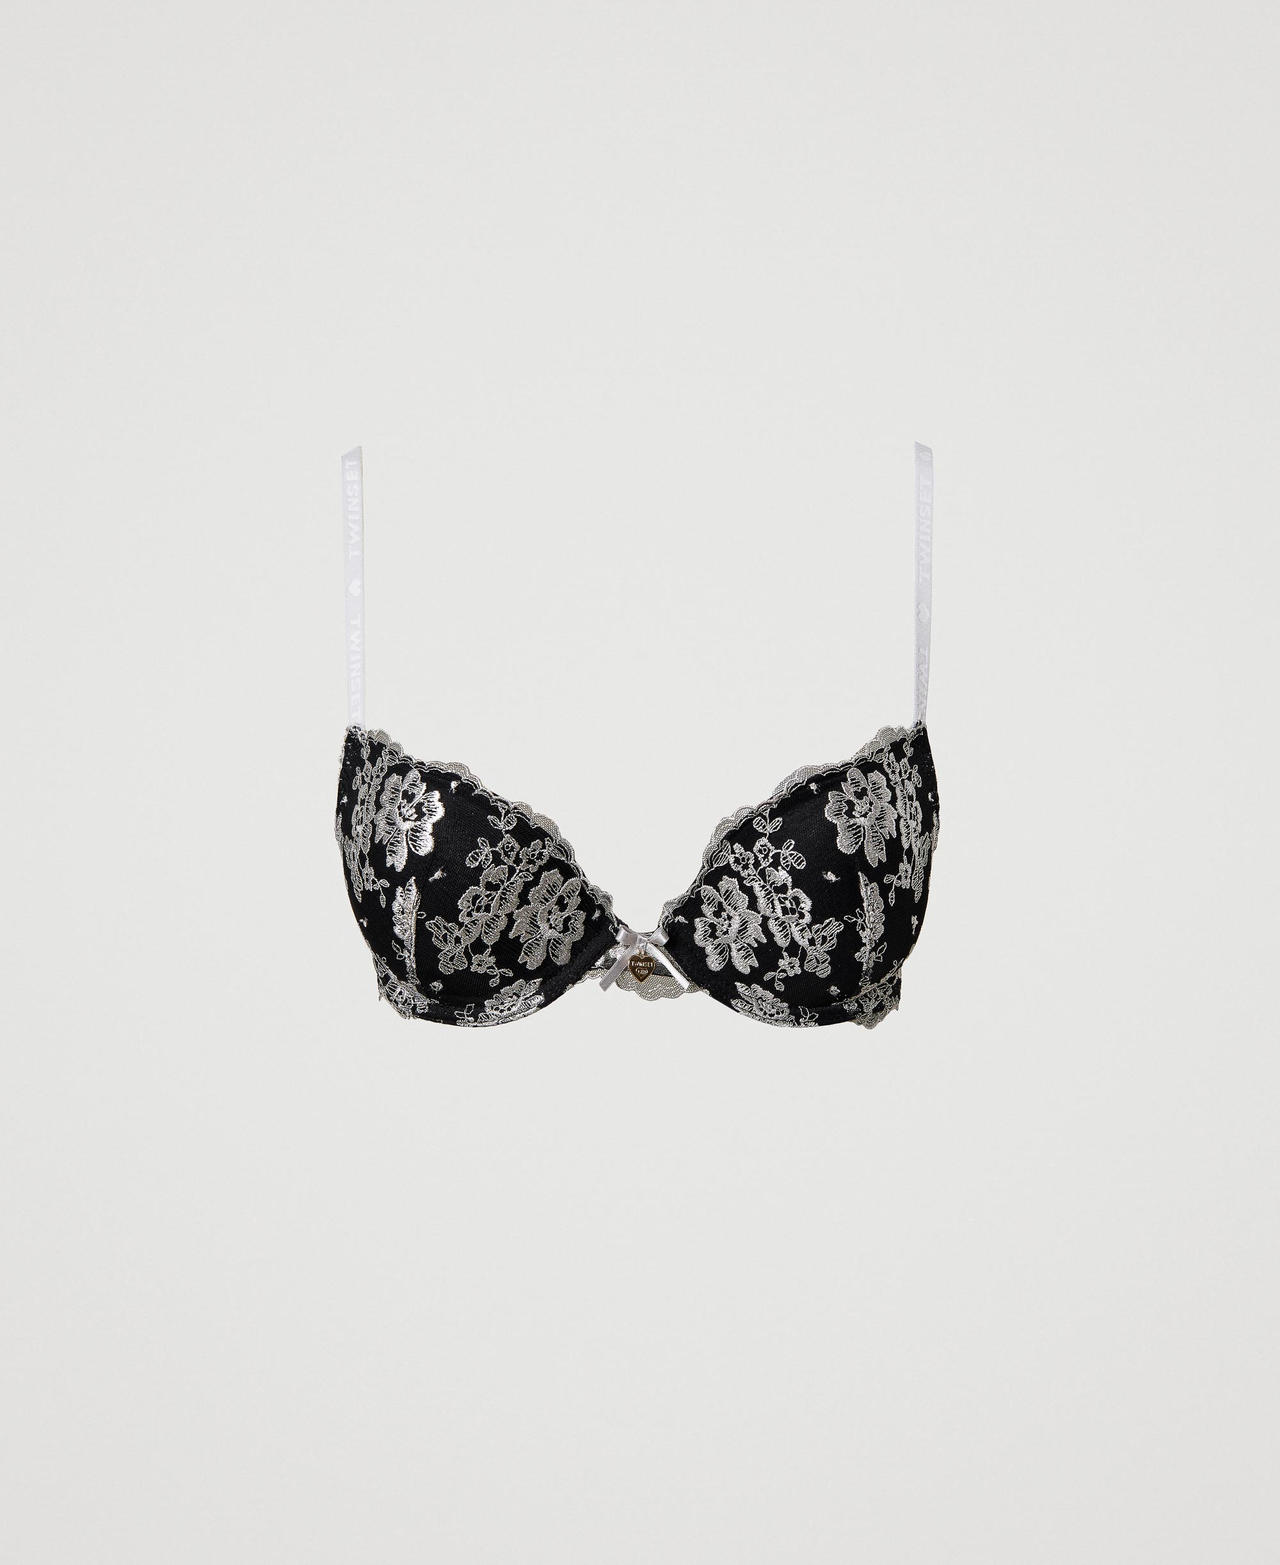 Floral Lace Embroidery Push Up Bra Black